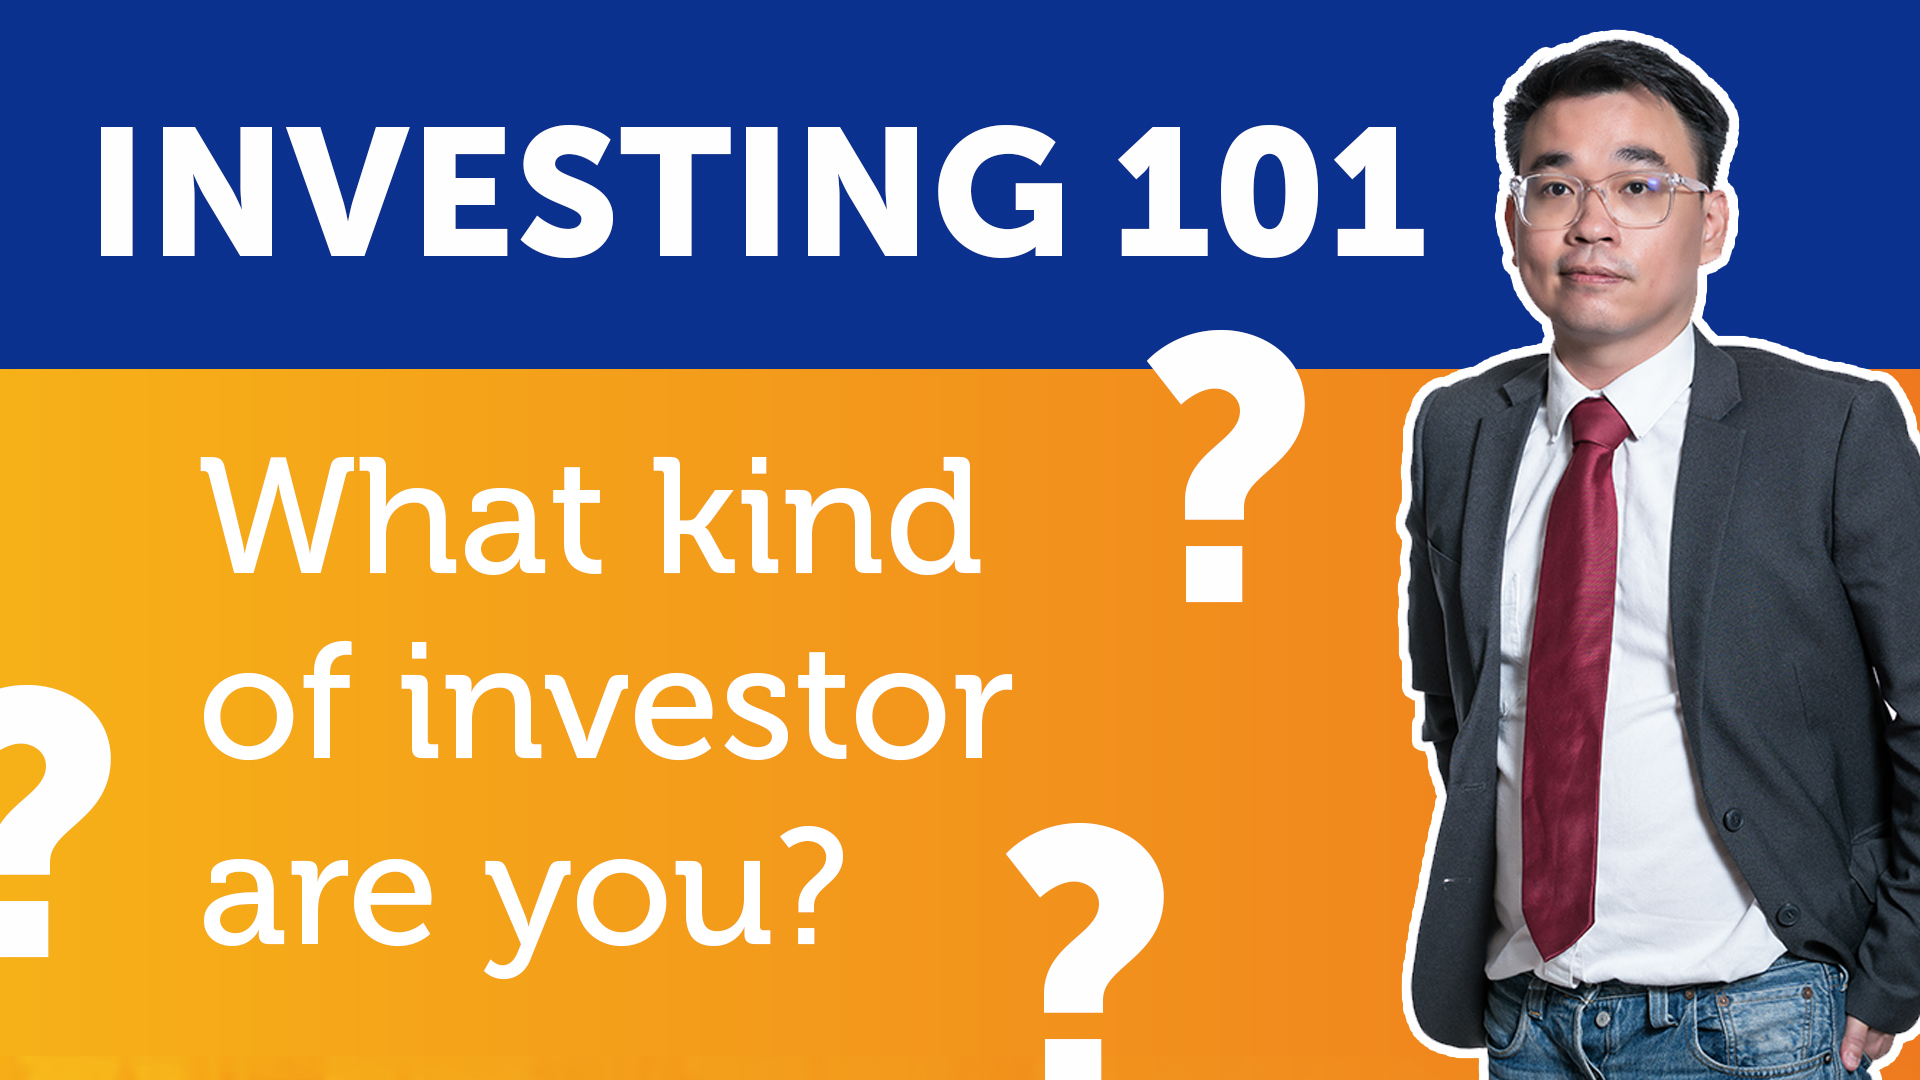 Investing 101 | What Kind of Investor Are You?